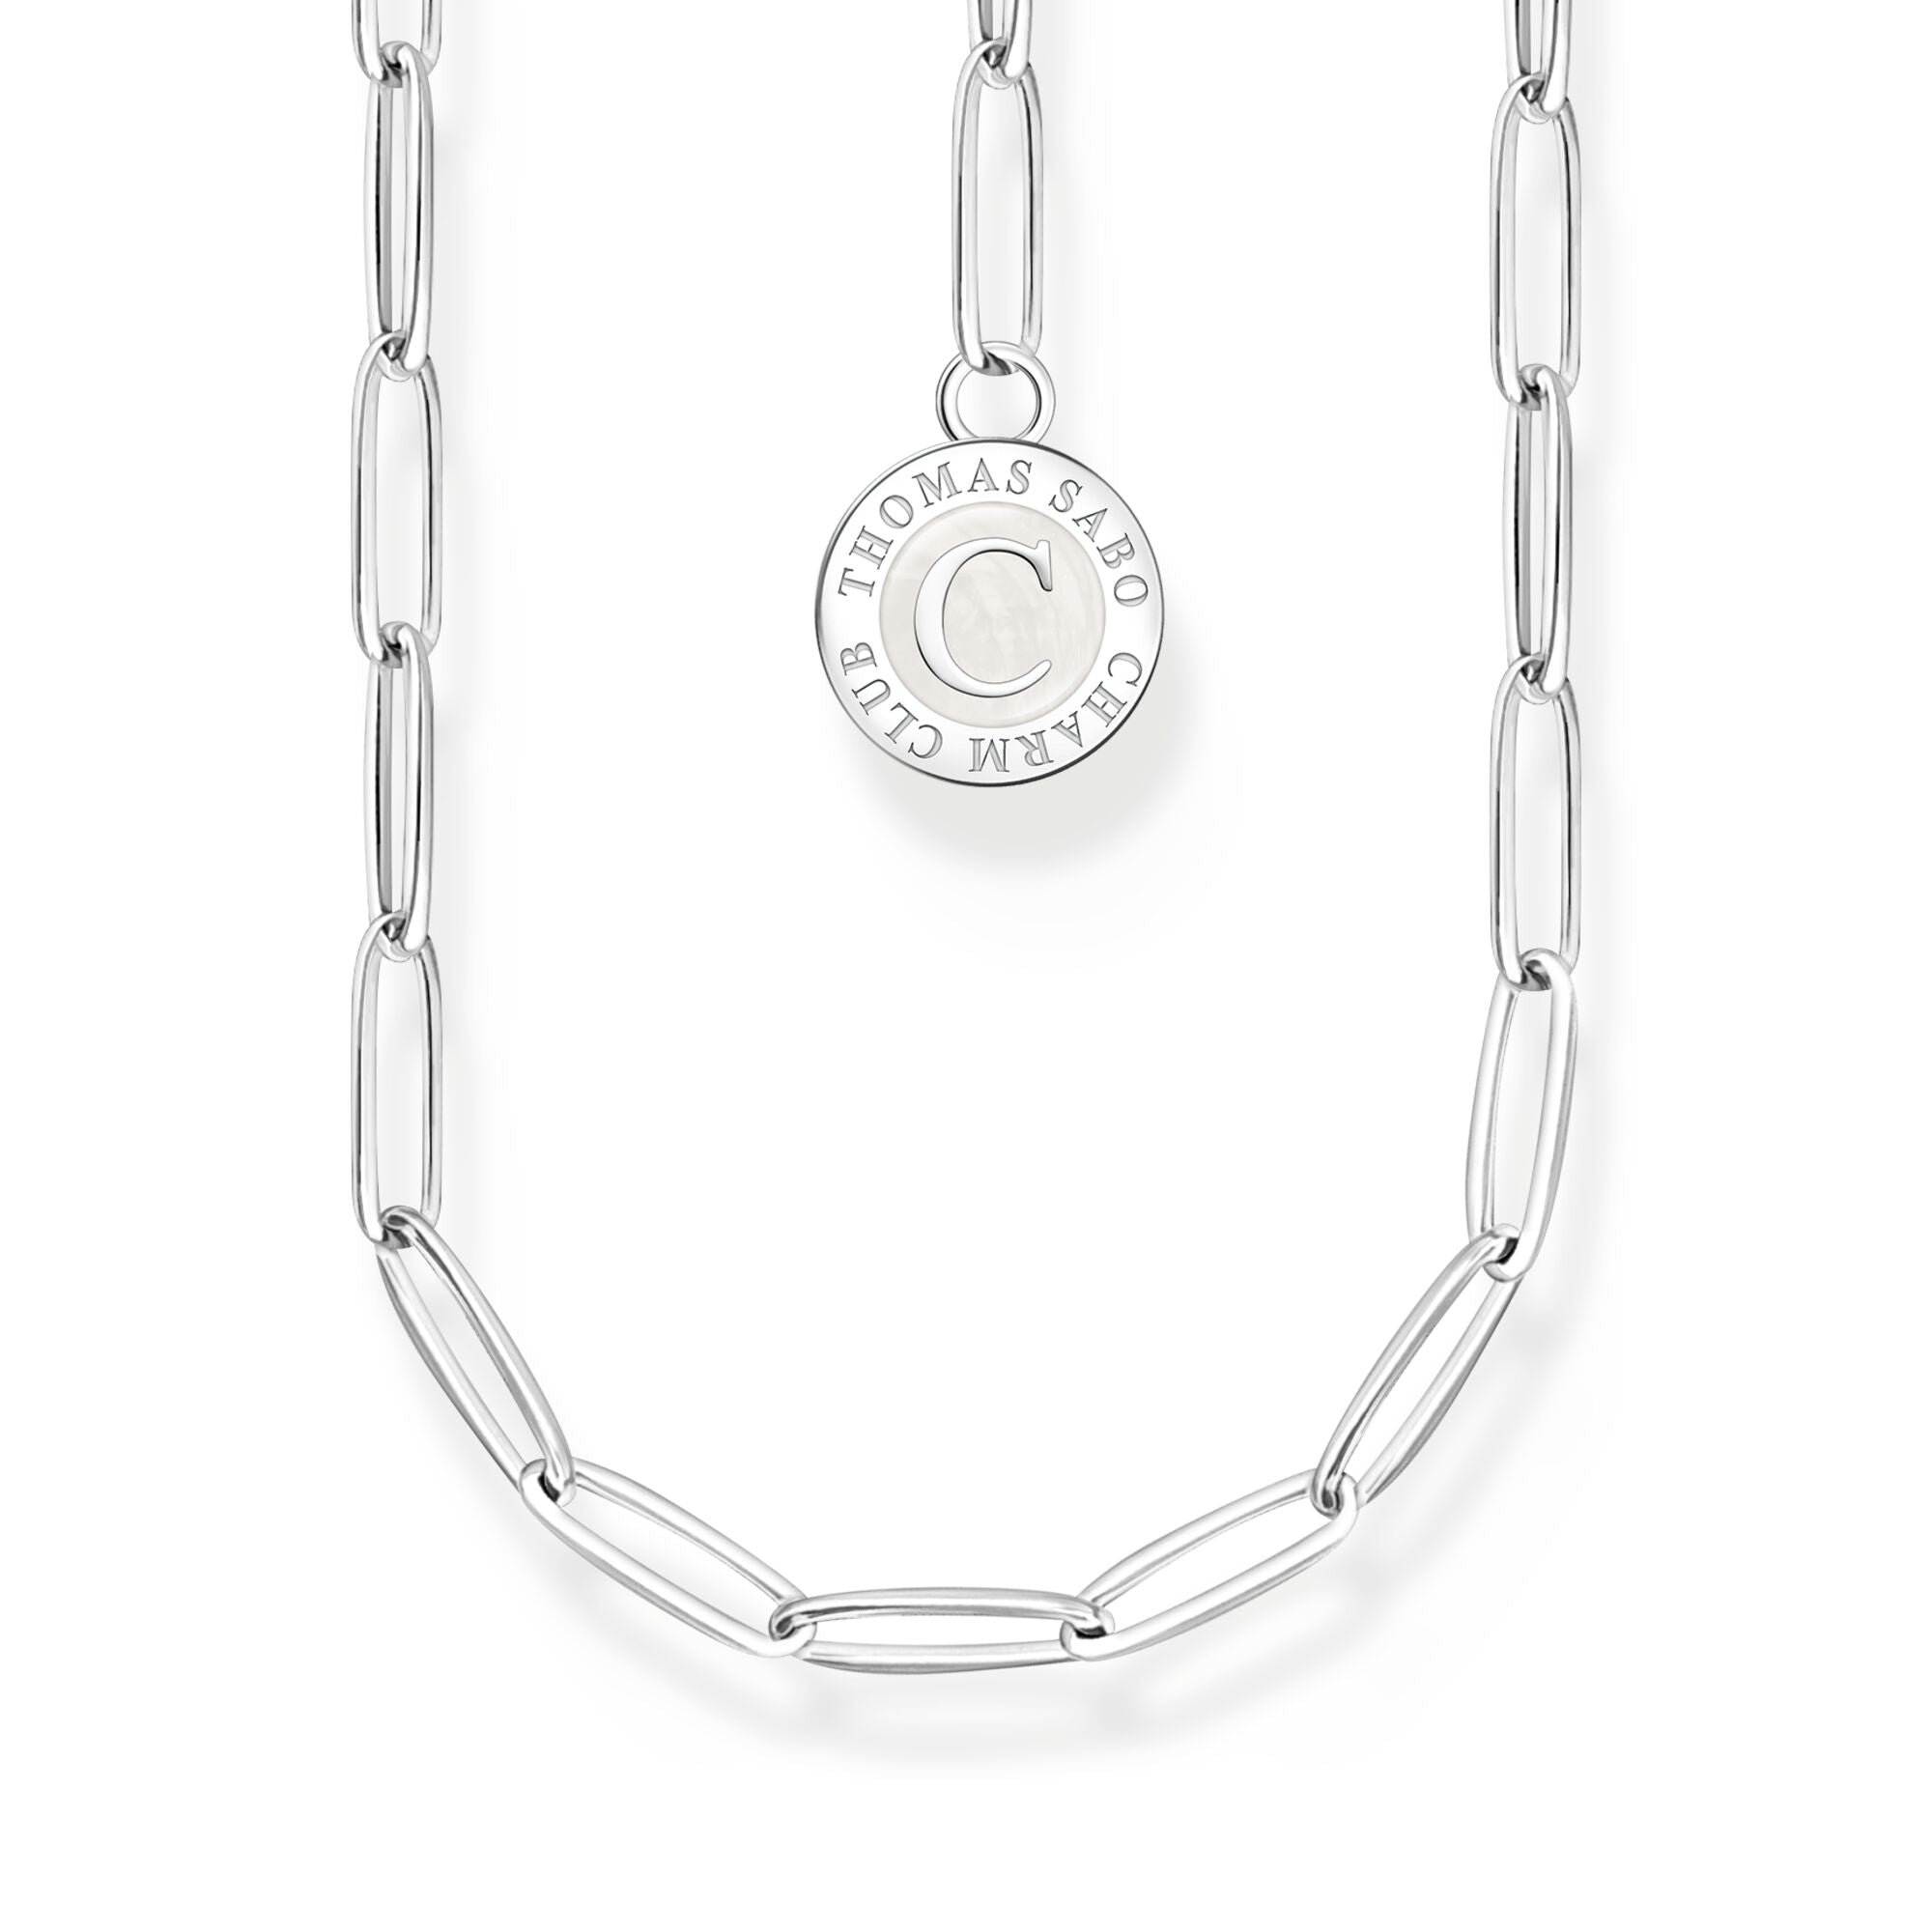 Buy Member Charm necklace with Charmista disc silver by Thomas Sabo ...